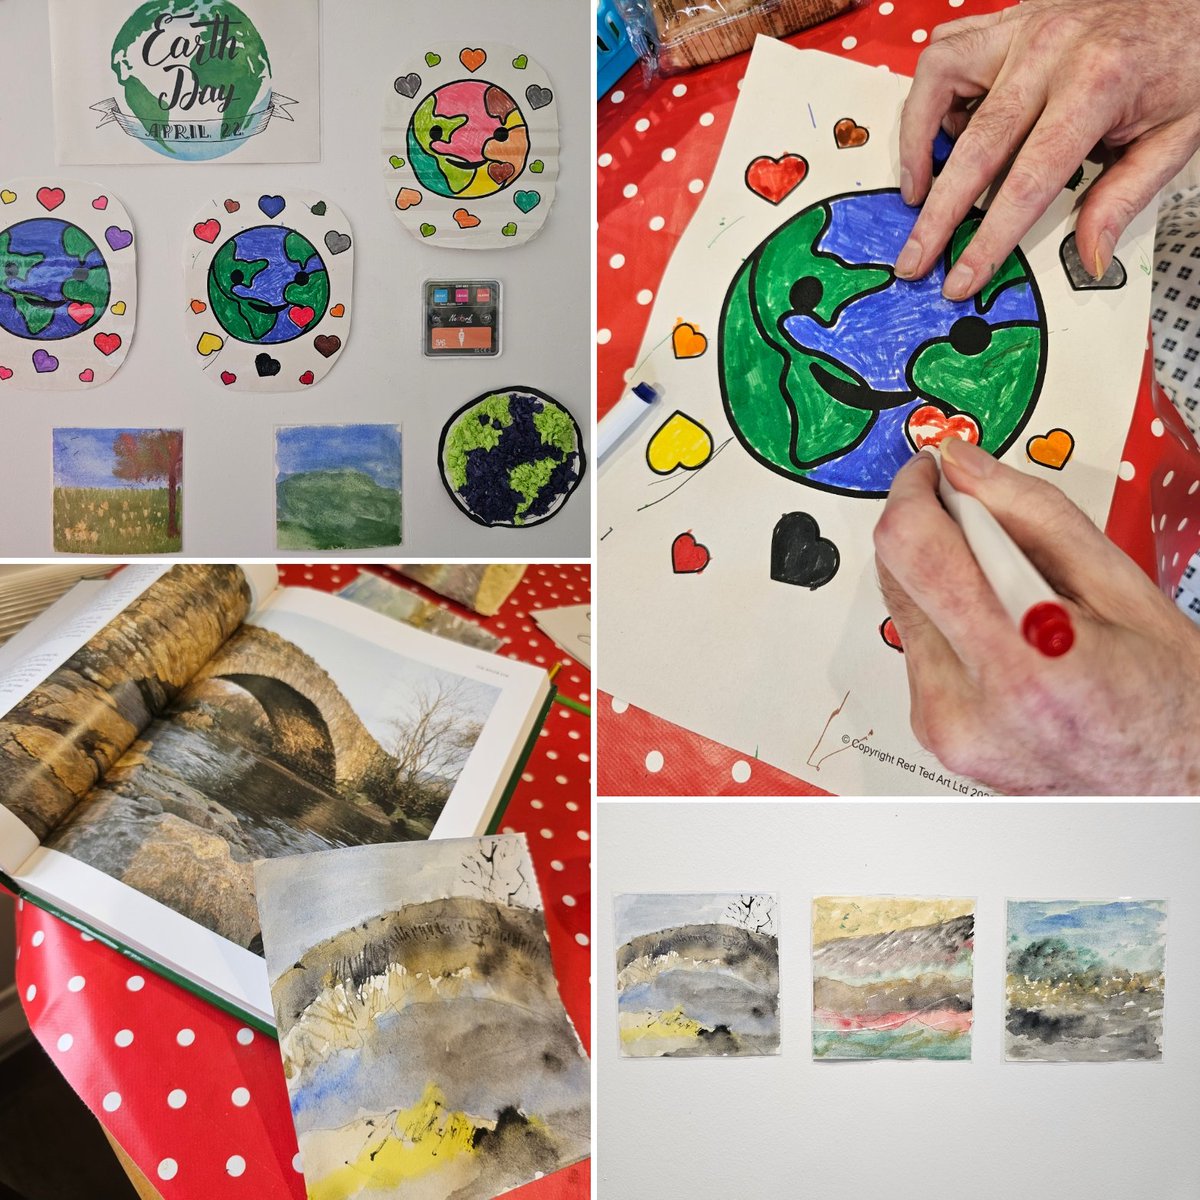 Monday was #EarthDay2024! Patients enjoyed making art - colouring, tissue paper & watercolour creations! 🎨🖌️🖼️We discussed how we treat our planet, changes over time & then our favourite travel spots 🌎 #ArtTherapy #PatientCare @CHSInpatientLPT @LPTnhs @LPT_Activities #WeAreLPT